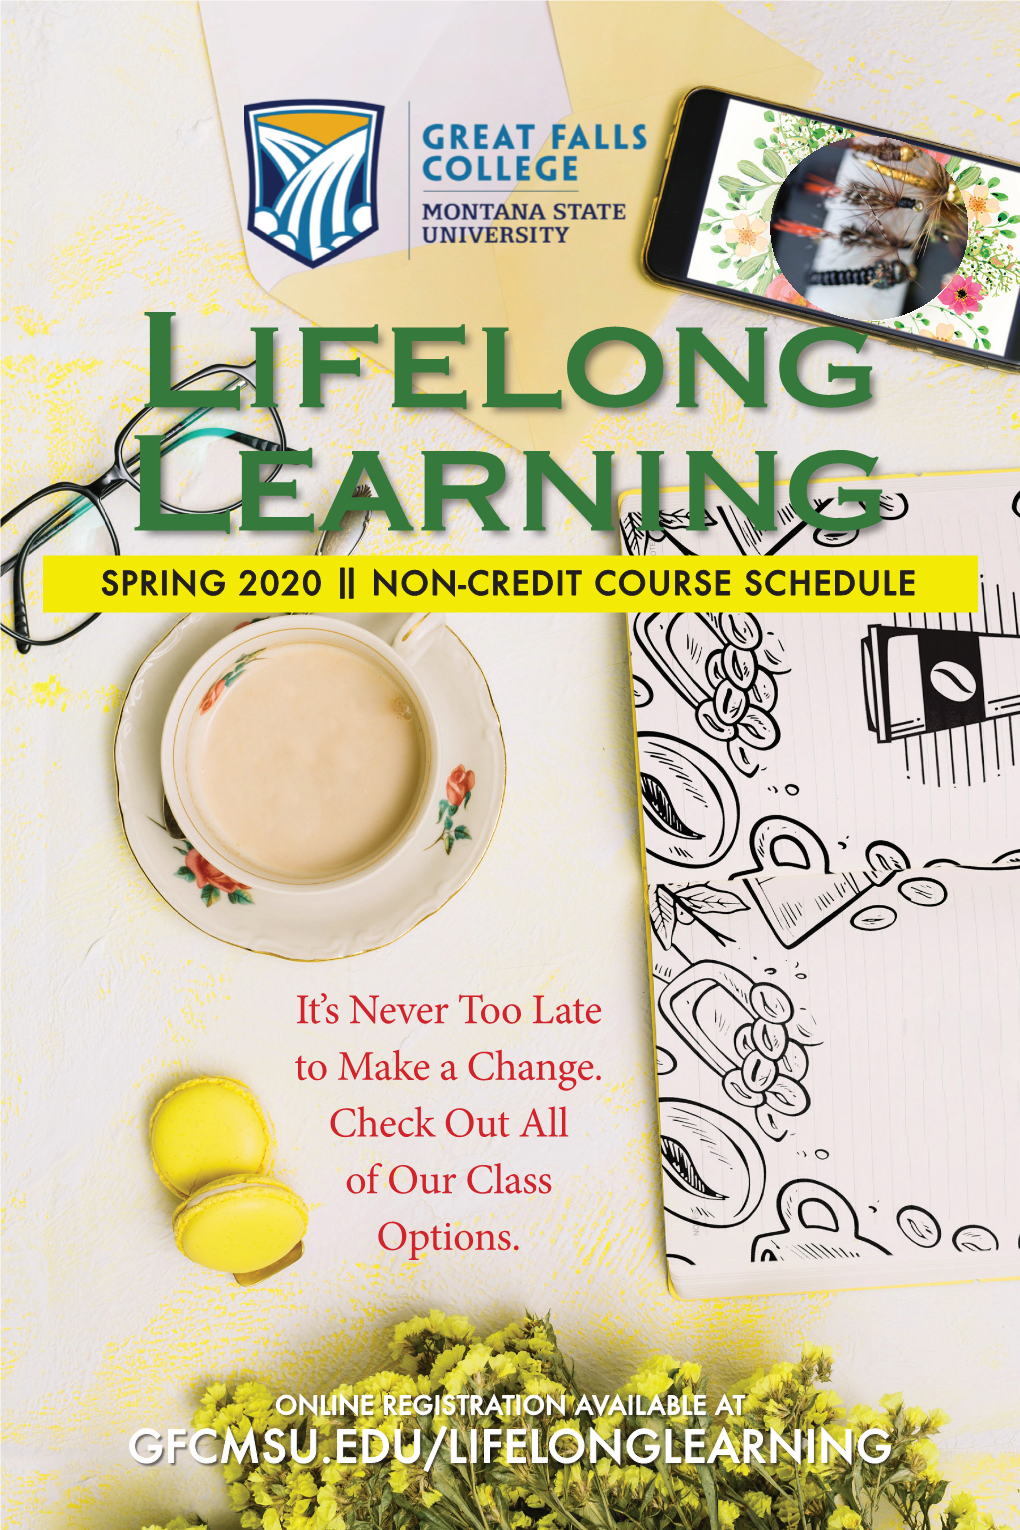 GFCMSU.EDU/LIFELONGLEARNING It's Never Too Late to Make a Change. Check out All of Our Class Options